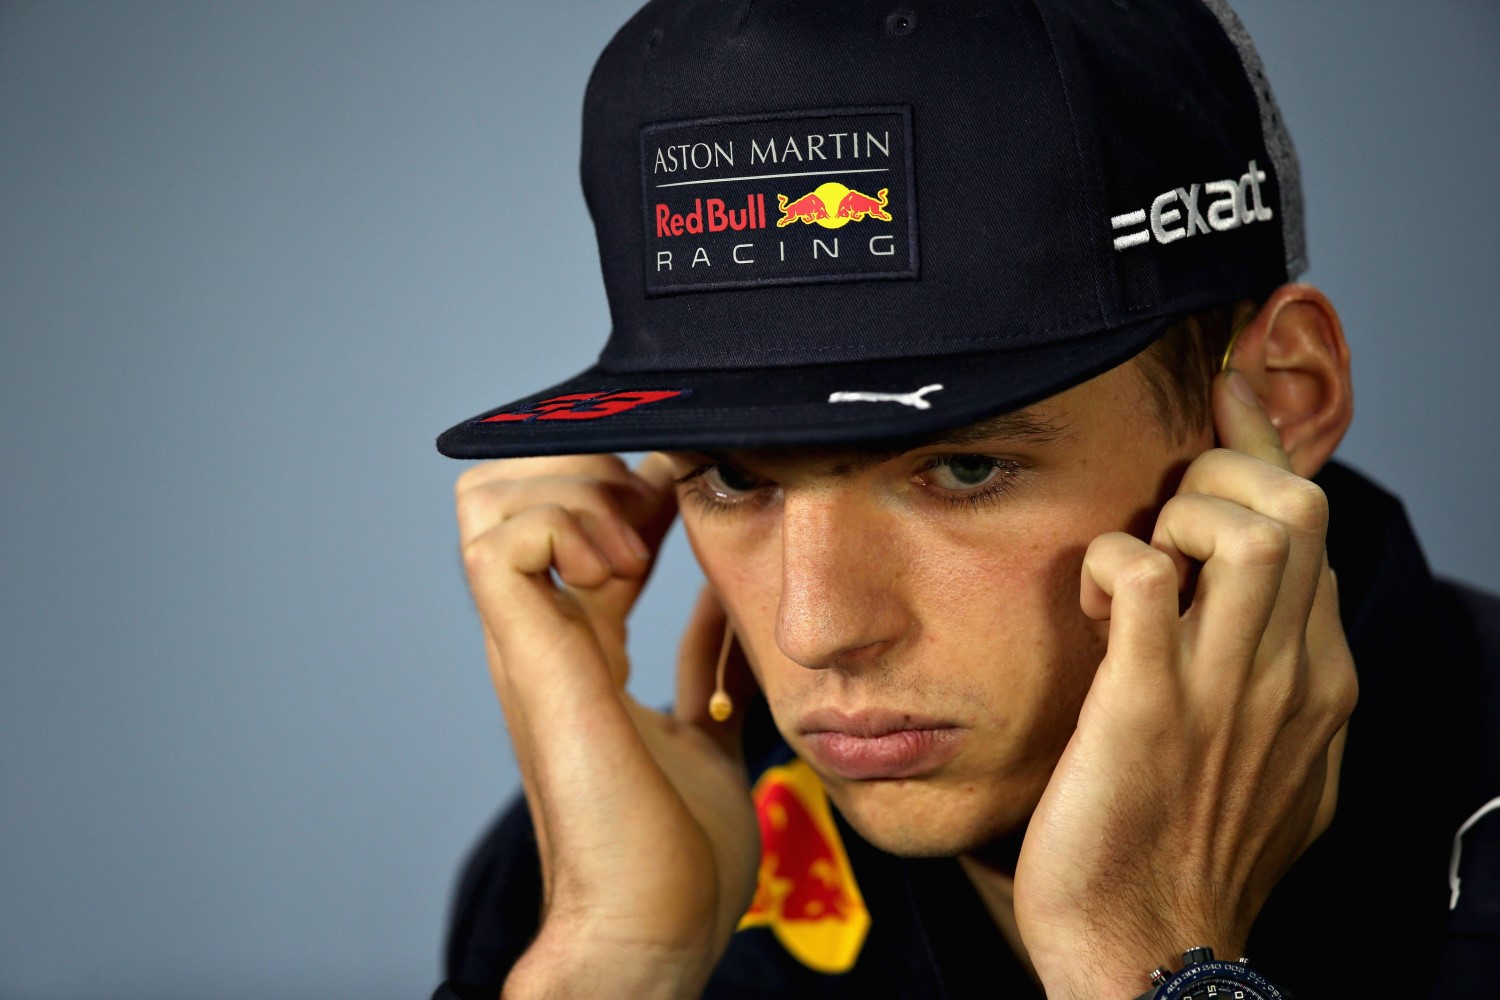 Max Verstappen lost all composure. Who or what will he hit this weekend?